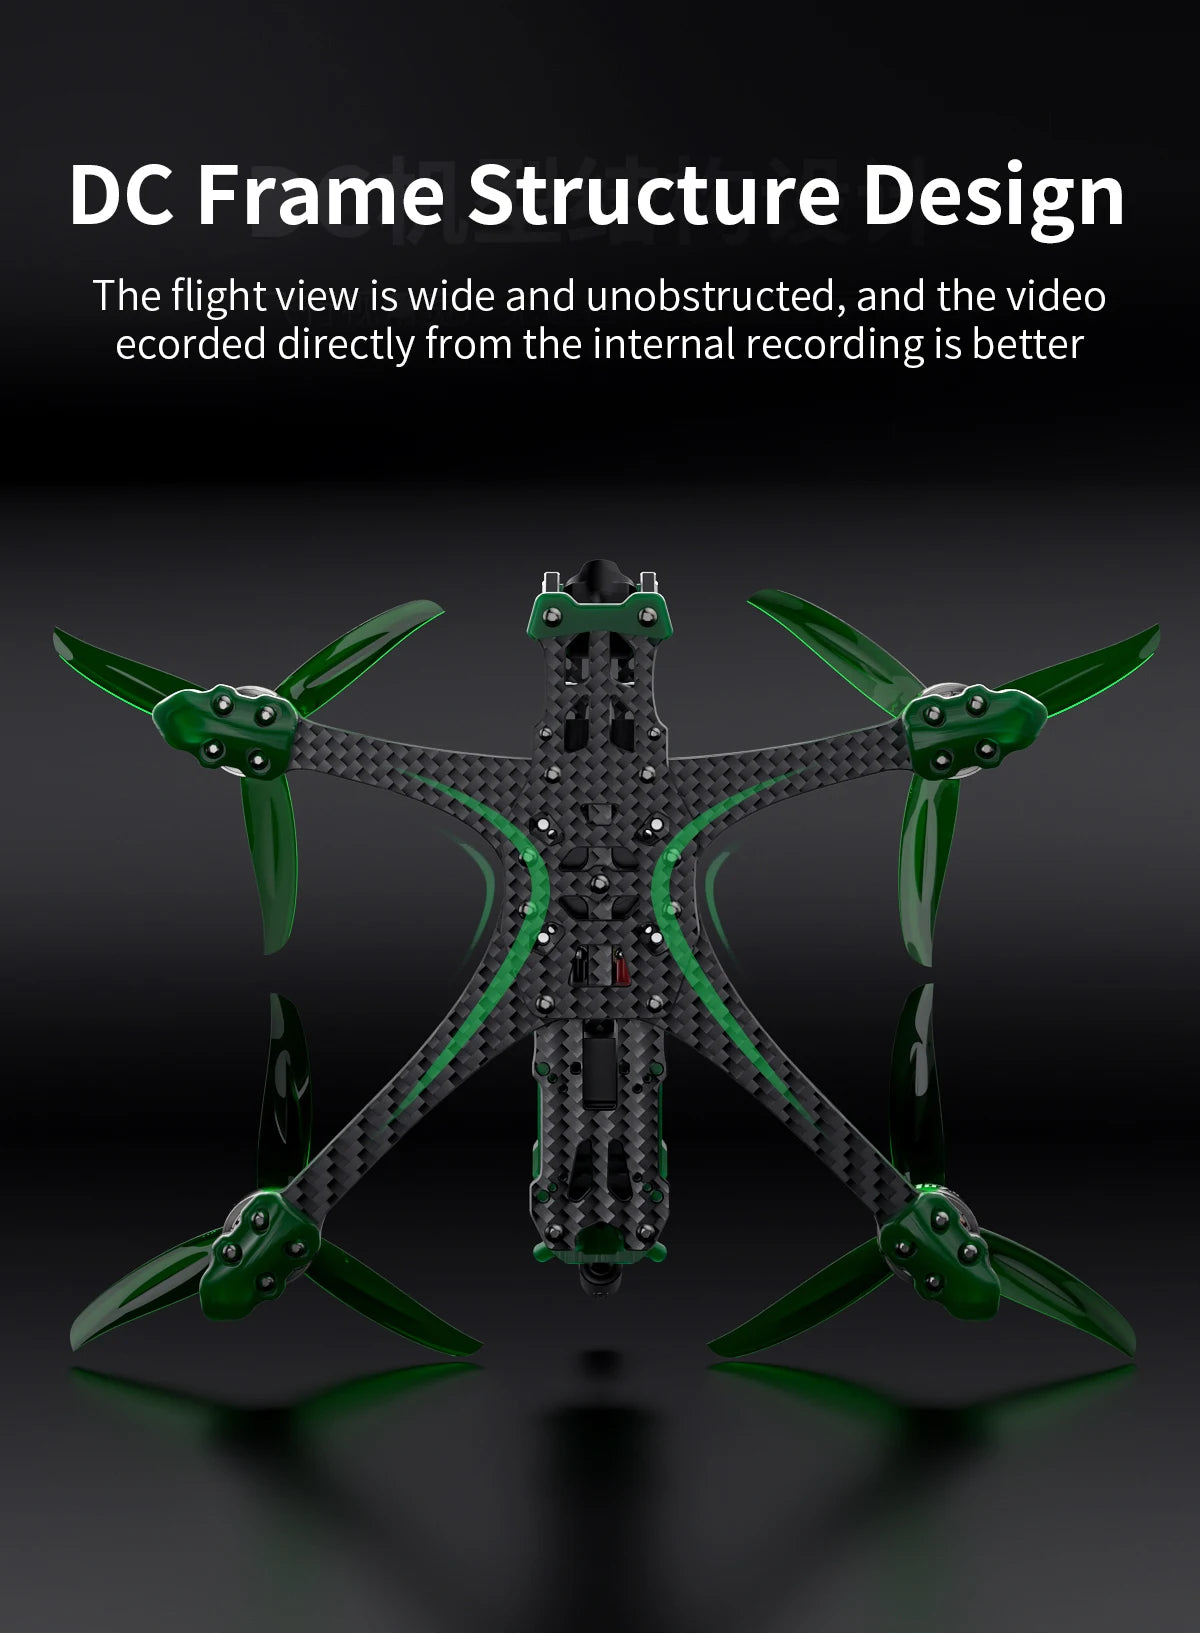 GEPRC MARK5 C HD O3 Freestyle FPV, DC Frame Structure Design The flight view is wide and unobstructed, and the video 